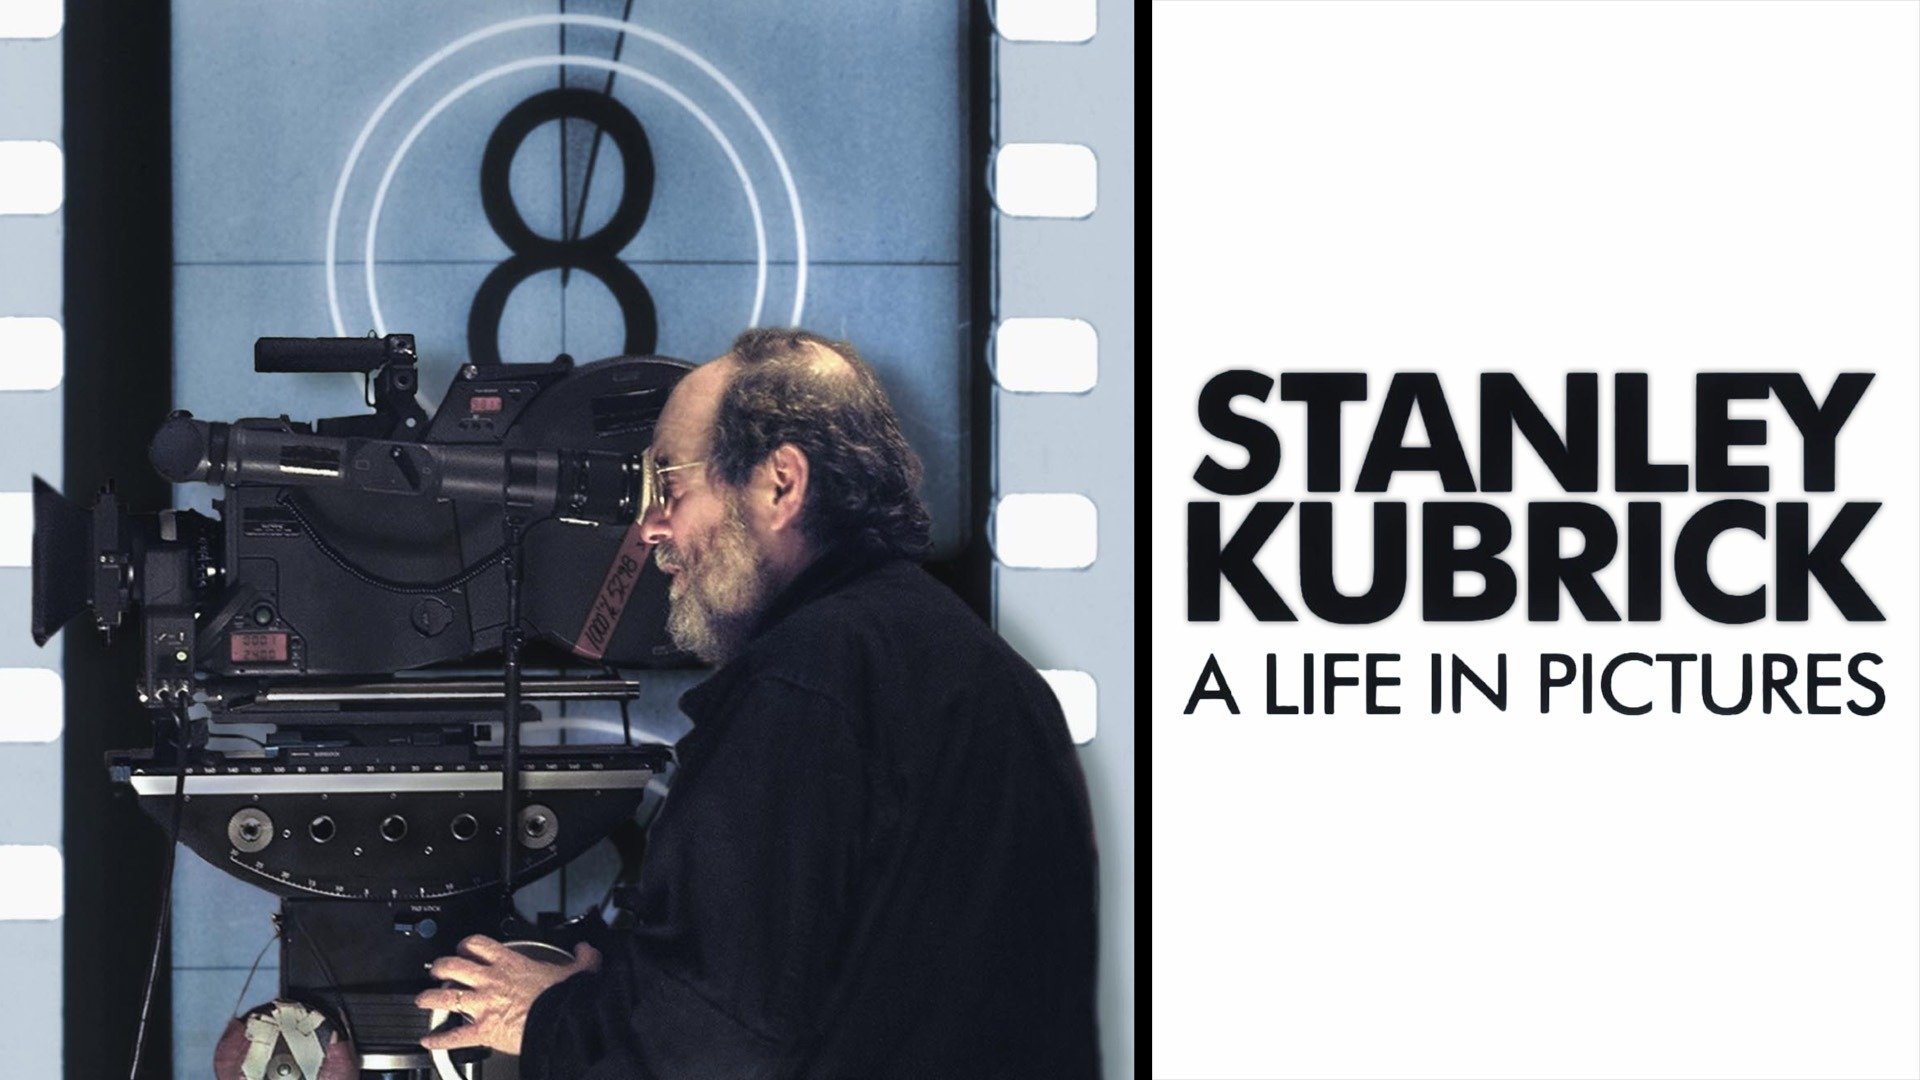 38-facts-about-the-movie-stanley-kubrick-a-life-in-pictures